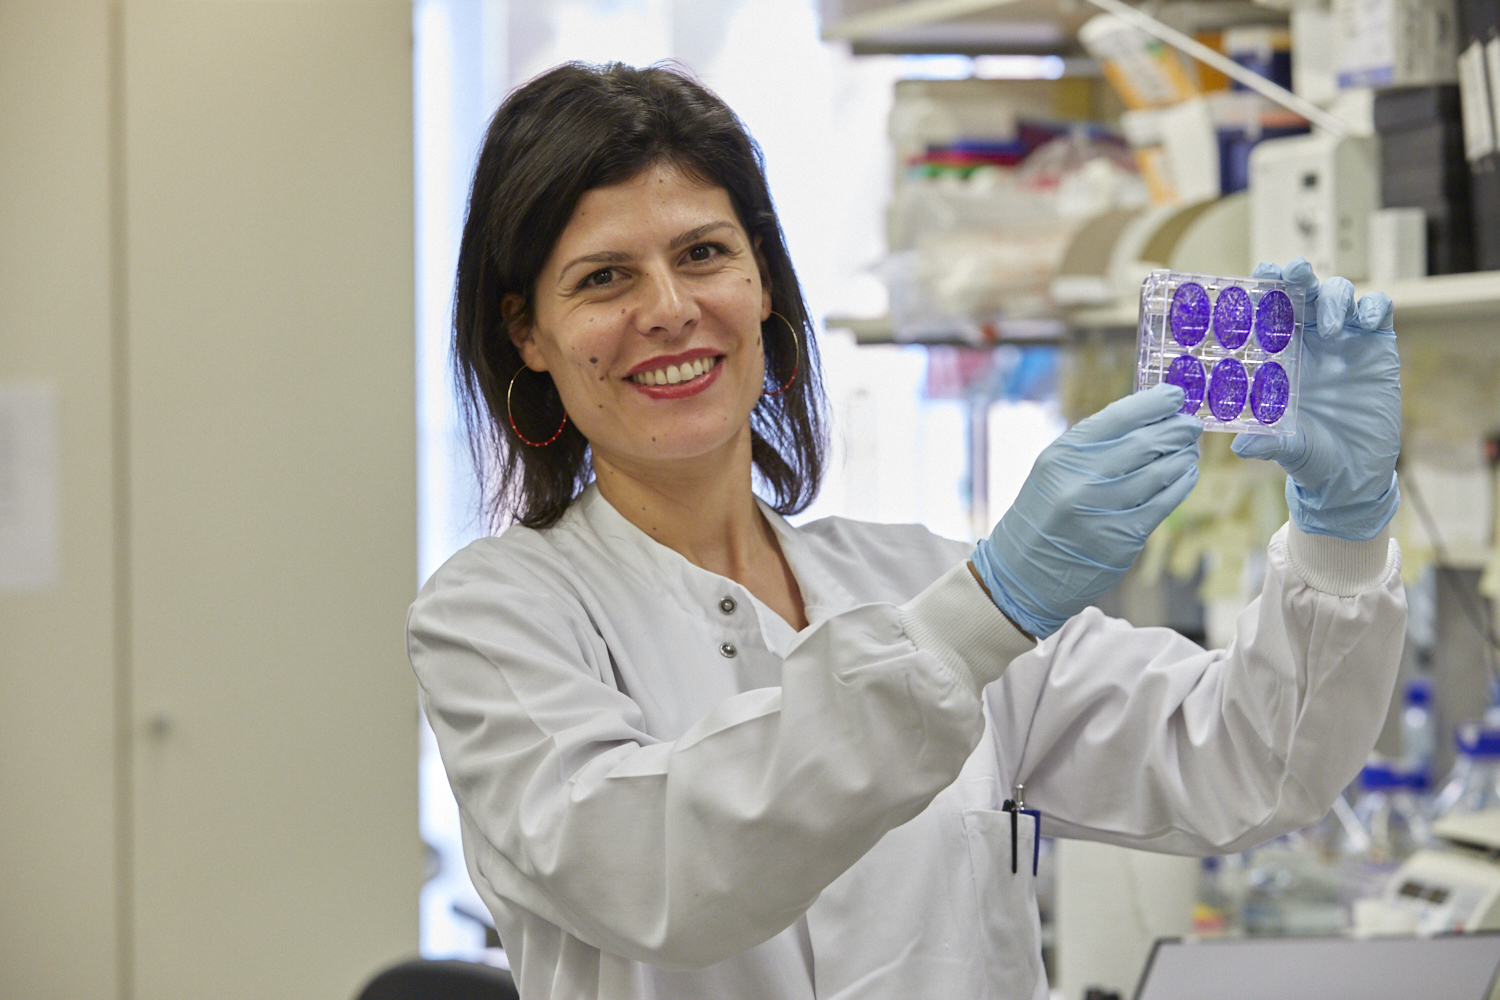 https://www.childrenwithcancer.org.uk/wp-content/uploads/2020/07/Femail-researcher-smiling-at-camera-holding-a-plate-of-cells.jpg